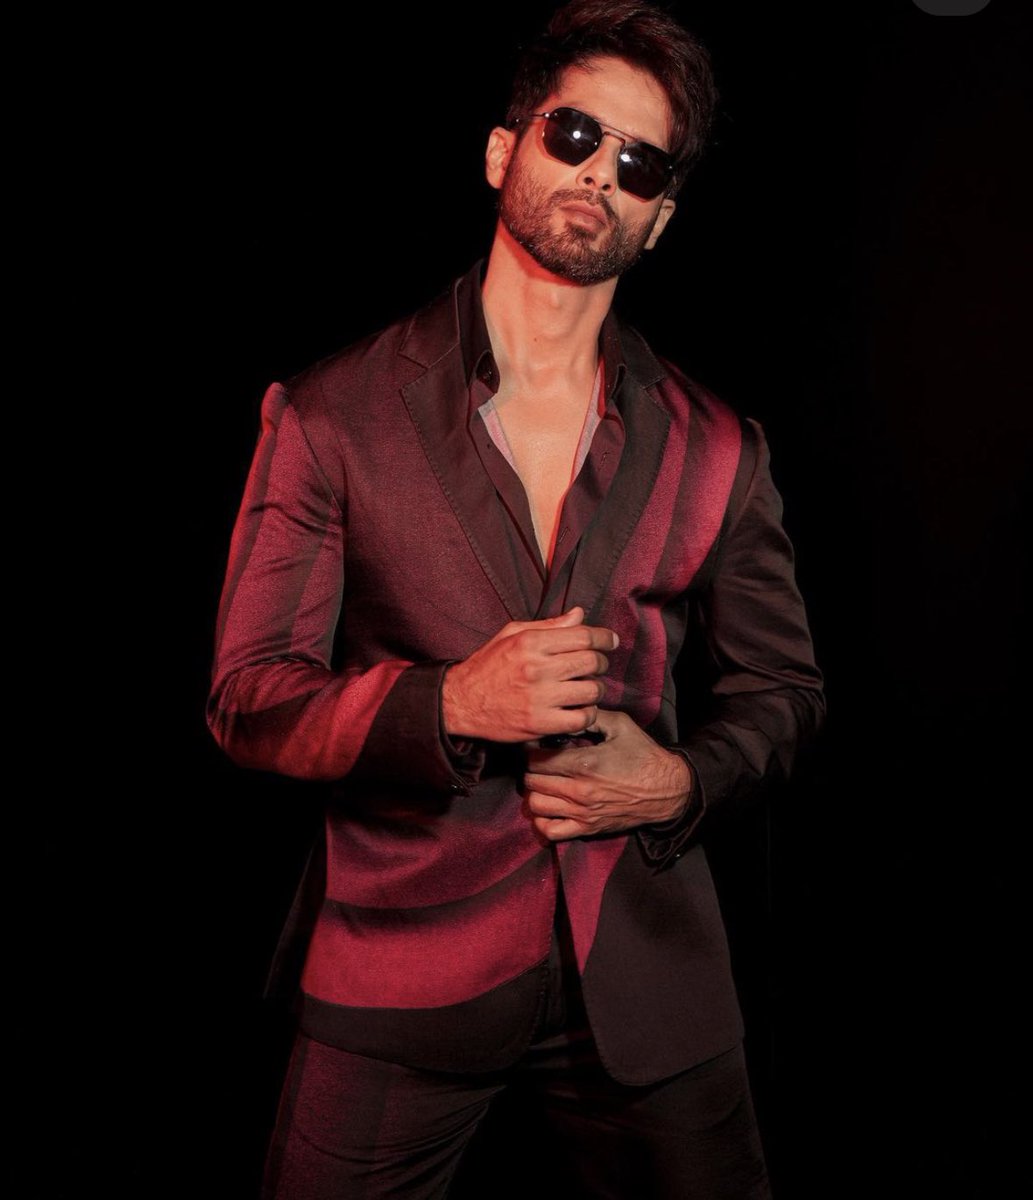 #BloodyDaddy has just released and #SanjayKapoor and #shahidkapoor have already become the fan-favourite in the film. #Shahid is getting praise from all around, critical and audiences alike for his impressive performance and looks are commendable 

@shahidkapoor @JioCinema